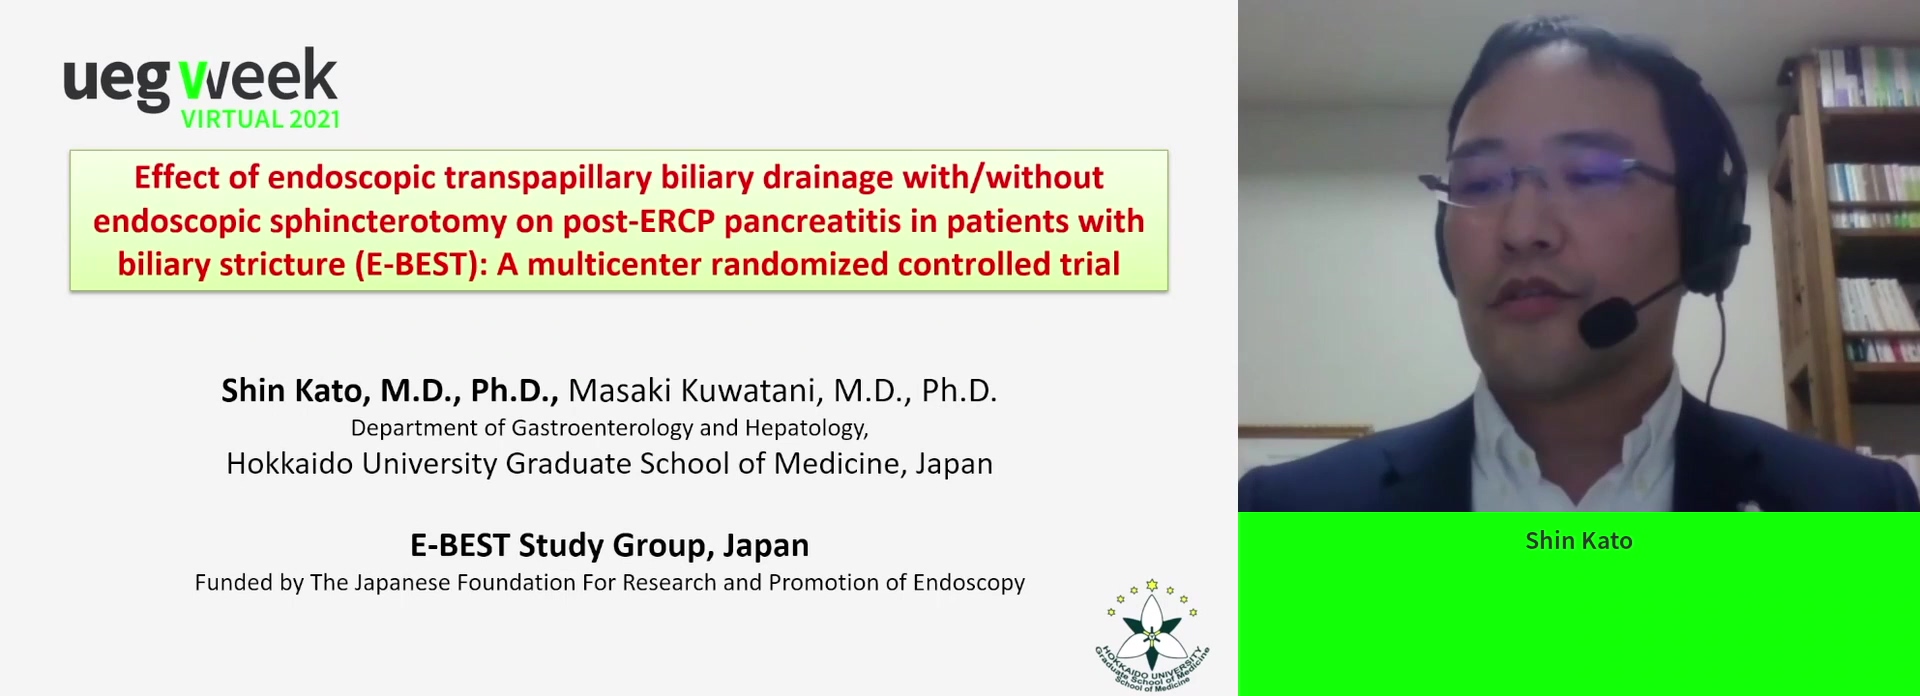 EFFECT OF ENDOSCOPIC TRANSPAPILLARY BILIARY DRAINAGE WITH/WITHOUT ENDOSCOPIC SPHINCTEROTOMY ON POST-ENDOSCOPIC RETROGRADE CHOLANGIOPANCREATOGRAPHY PANCREATITIS IN PATIENTS WITH BILIARY STRICTURE (E-BEST): A MULTICENTER RANDOMIZED CONTROLLED TRIAL